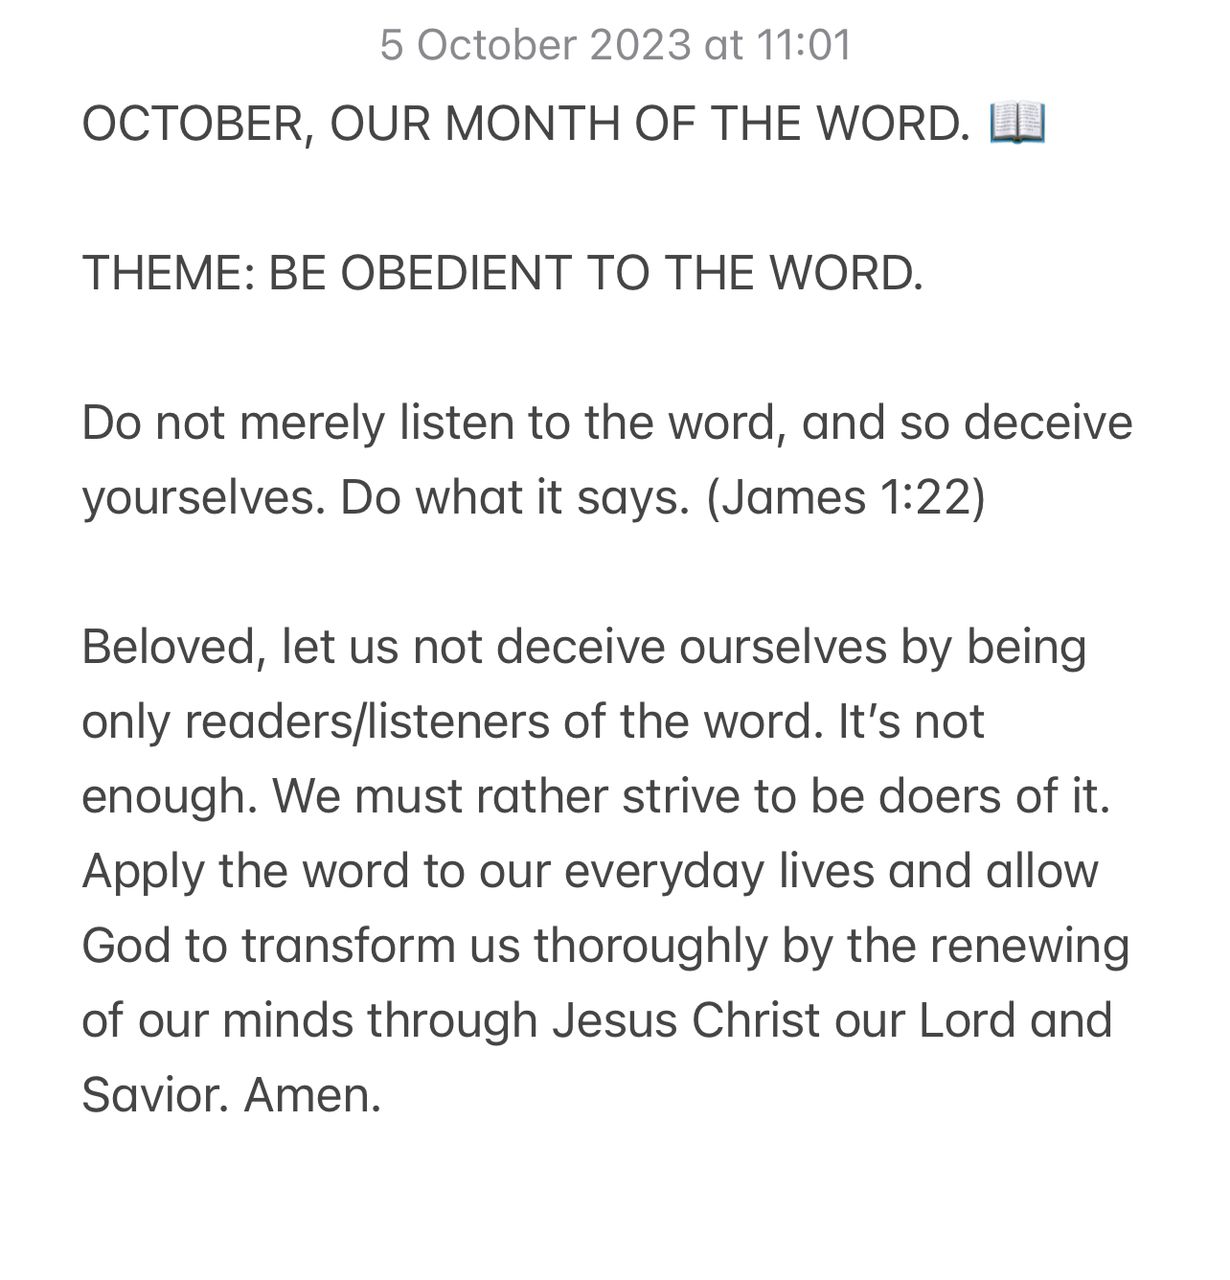 BE OBEDIENT TO THE WORD.